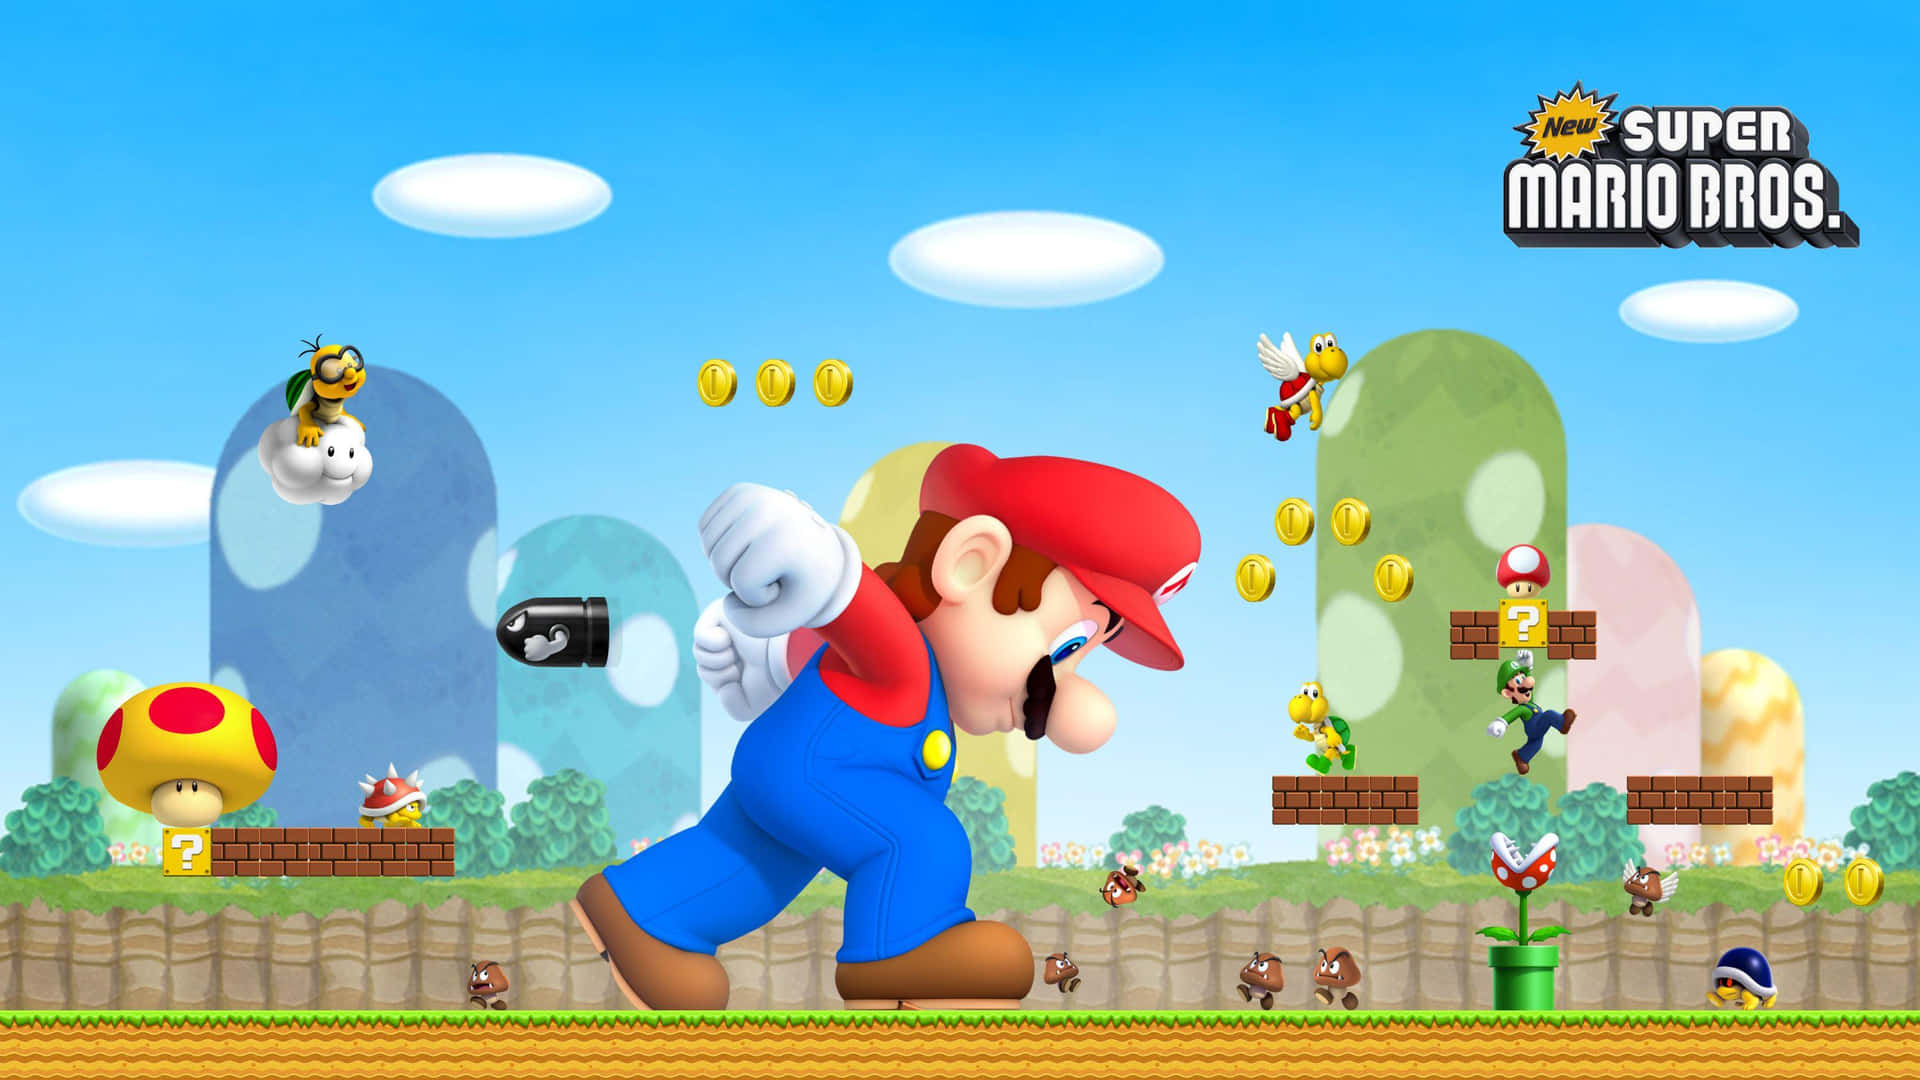 "Jump into an adventure with the world's most iconic Italian plumber!"